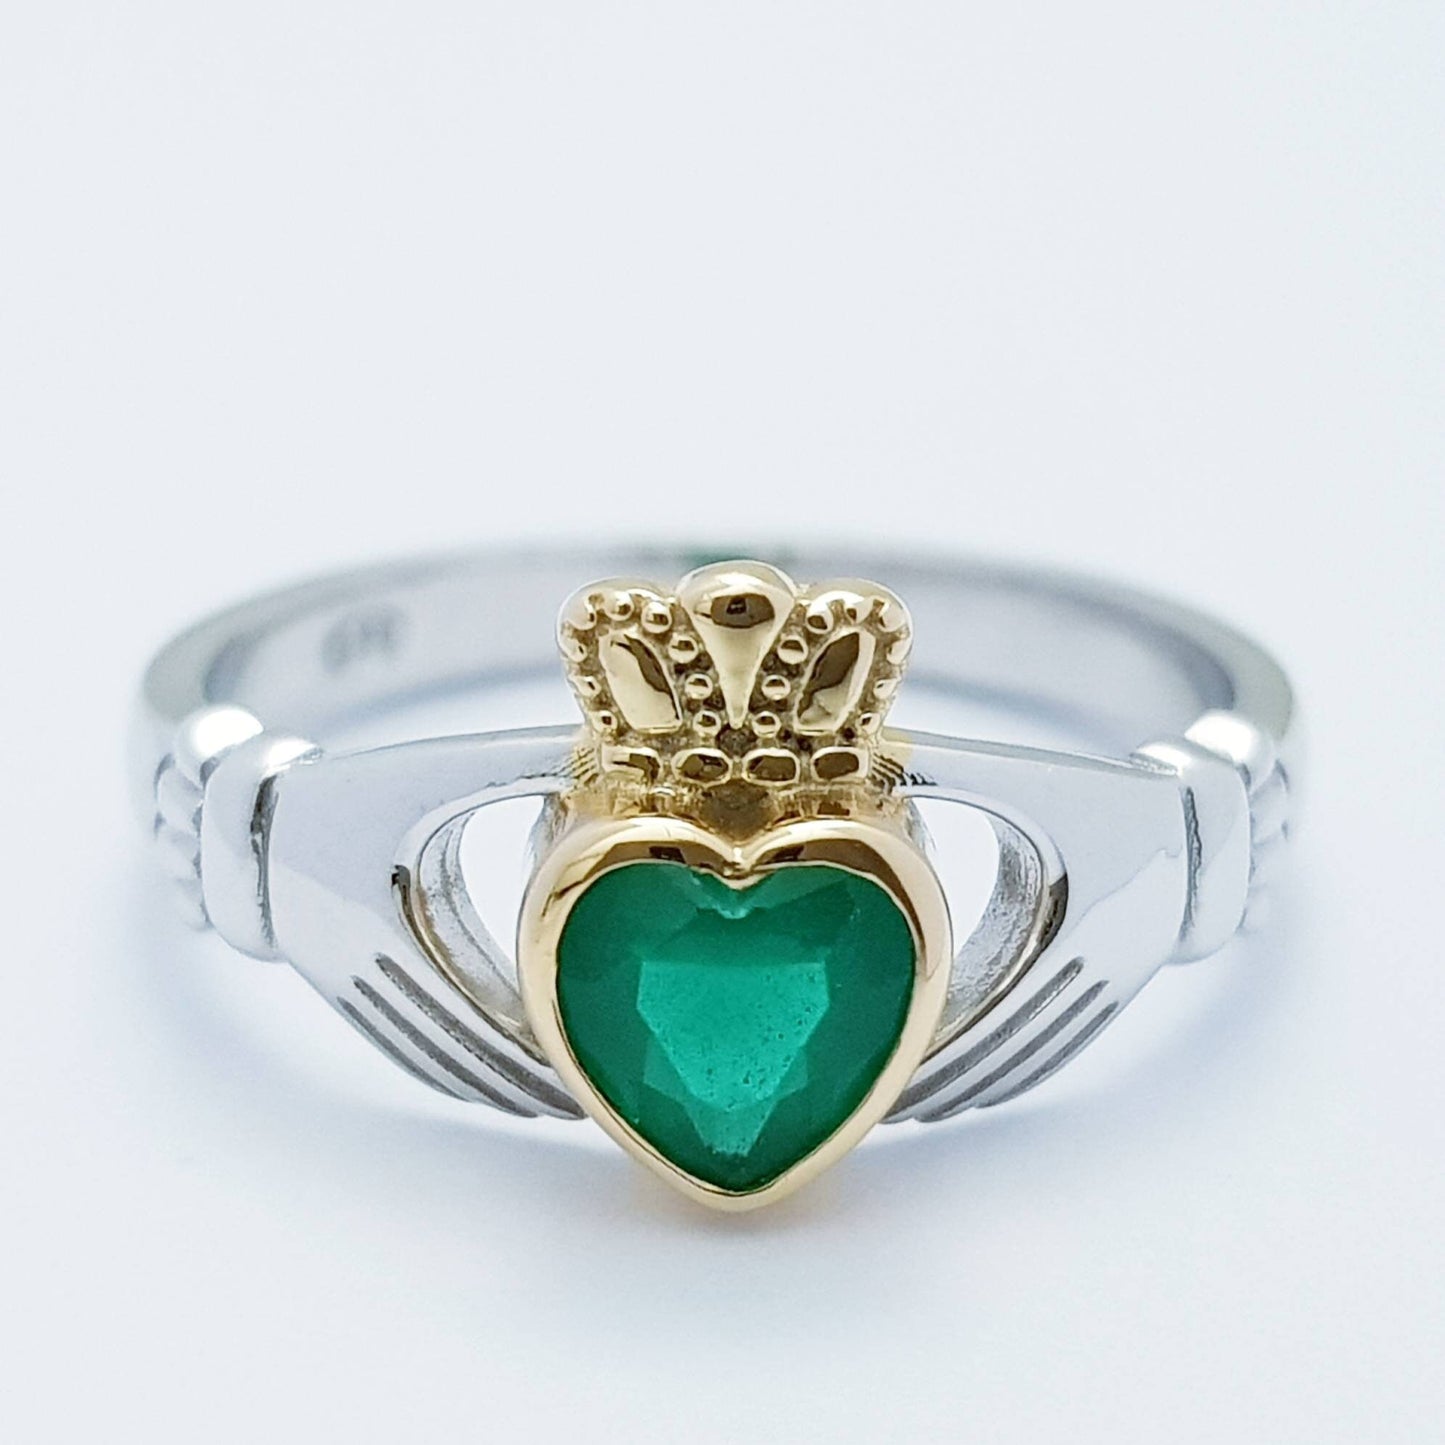 Sterling Silver yellow Gold plated Claddagh ring set with emerald green stone, irish claddagh rings